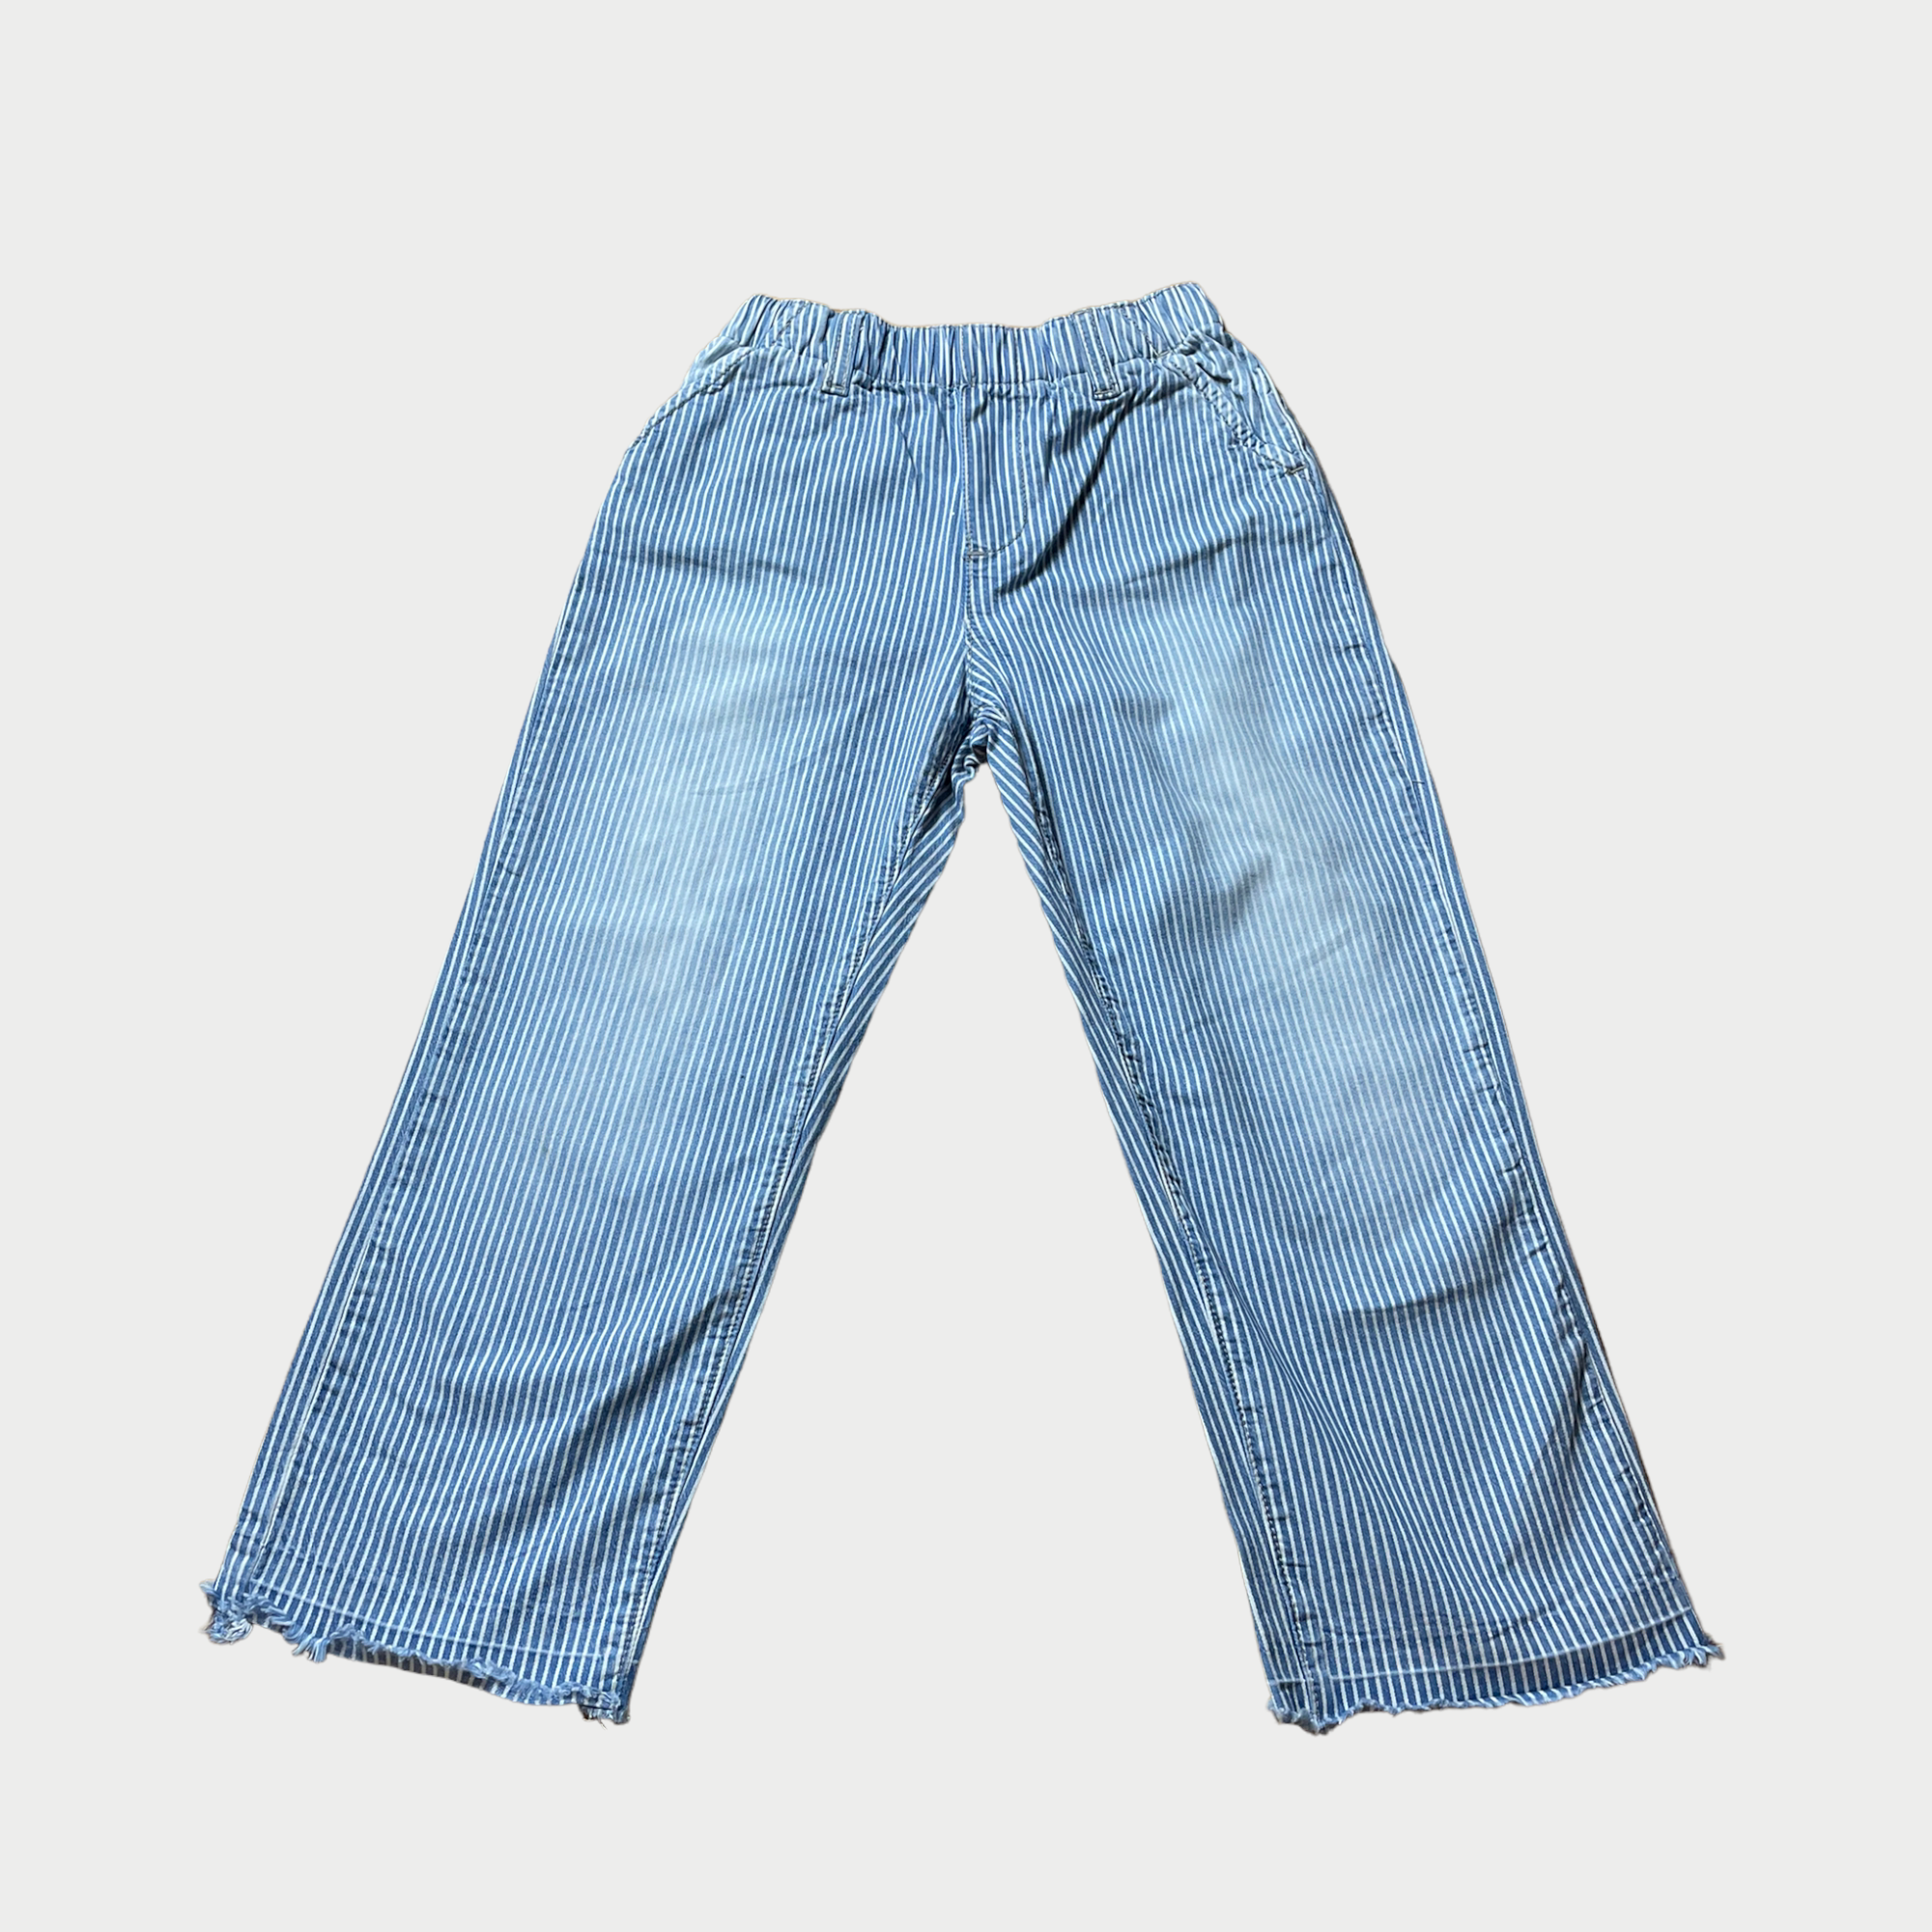 Pantalon American outfitters 8 ans